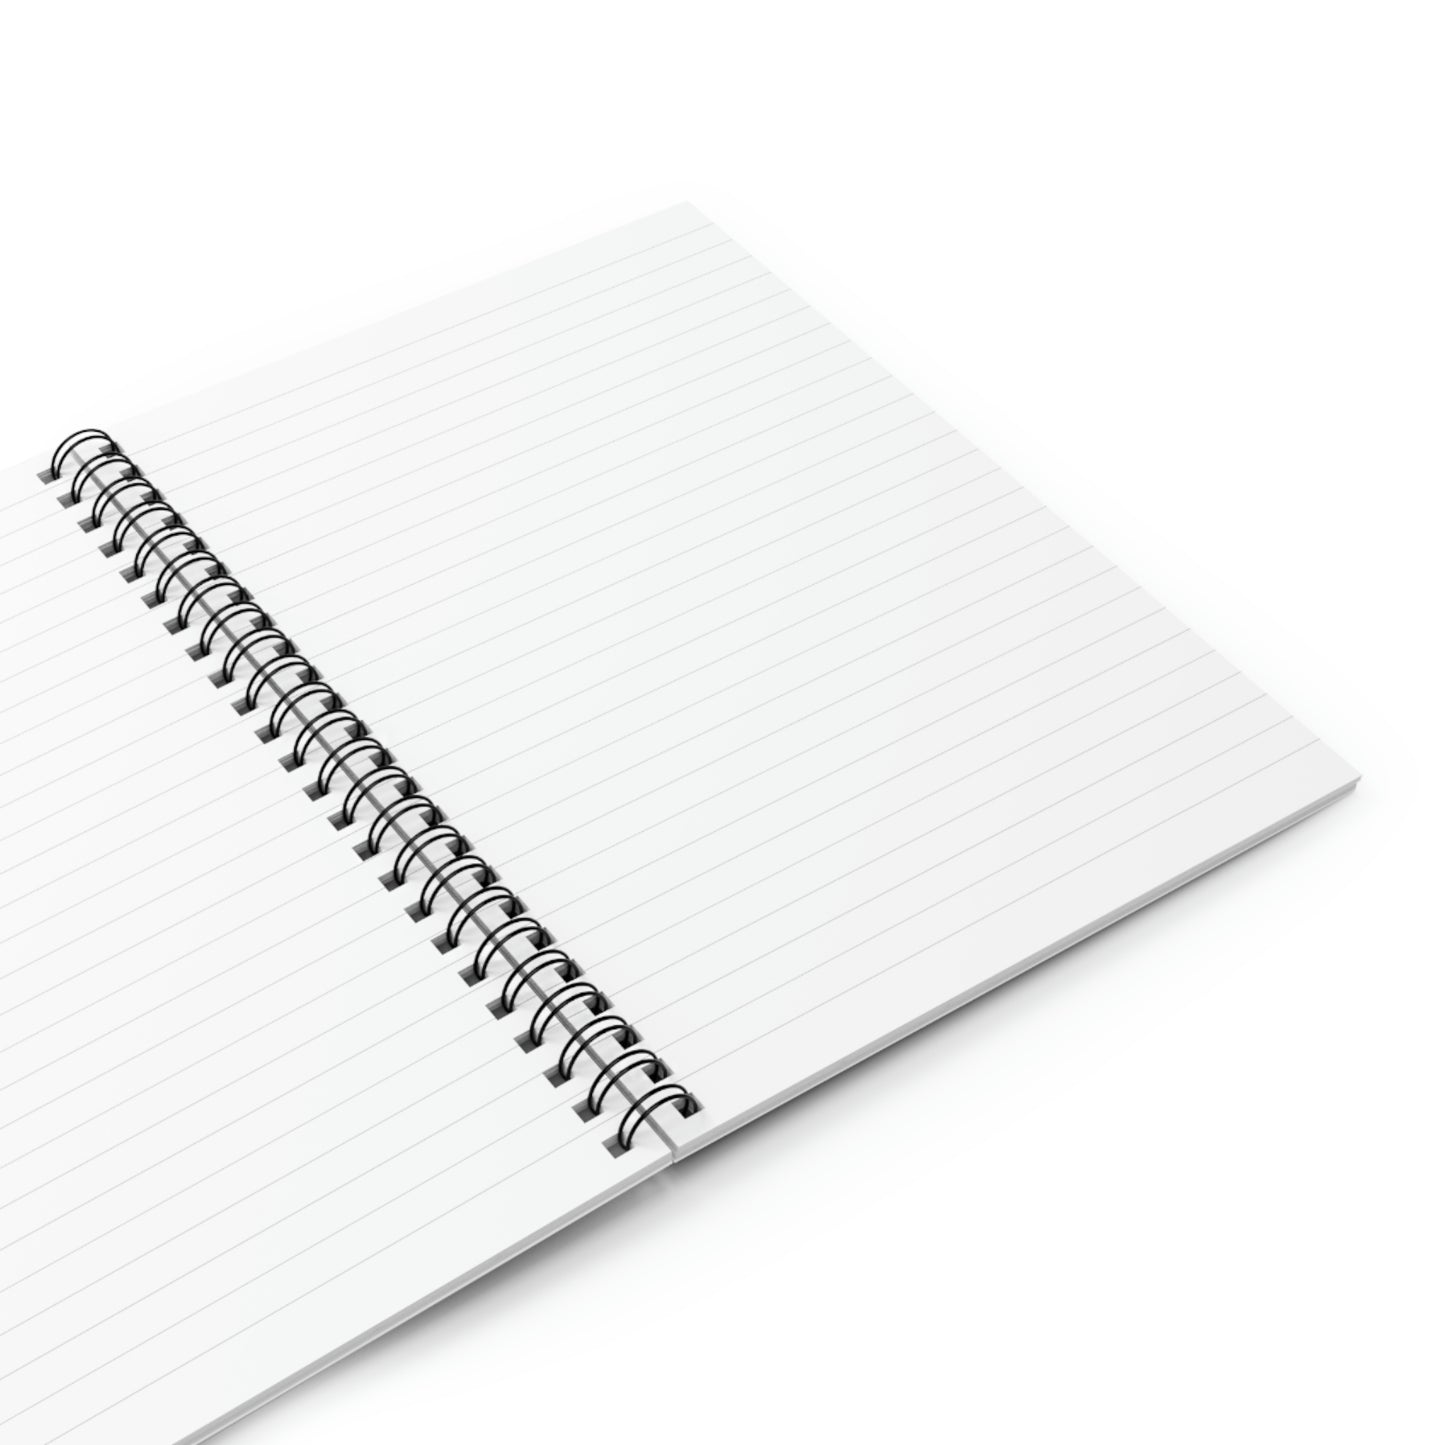 Booked, Busy, Unbothered (African American) (Black and White Cover) Spiral Notebook - Ruled Line